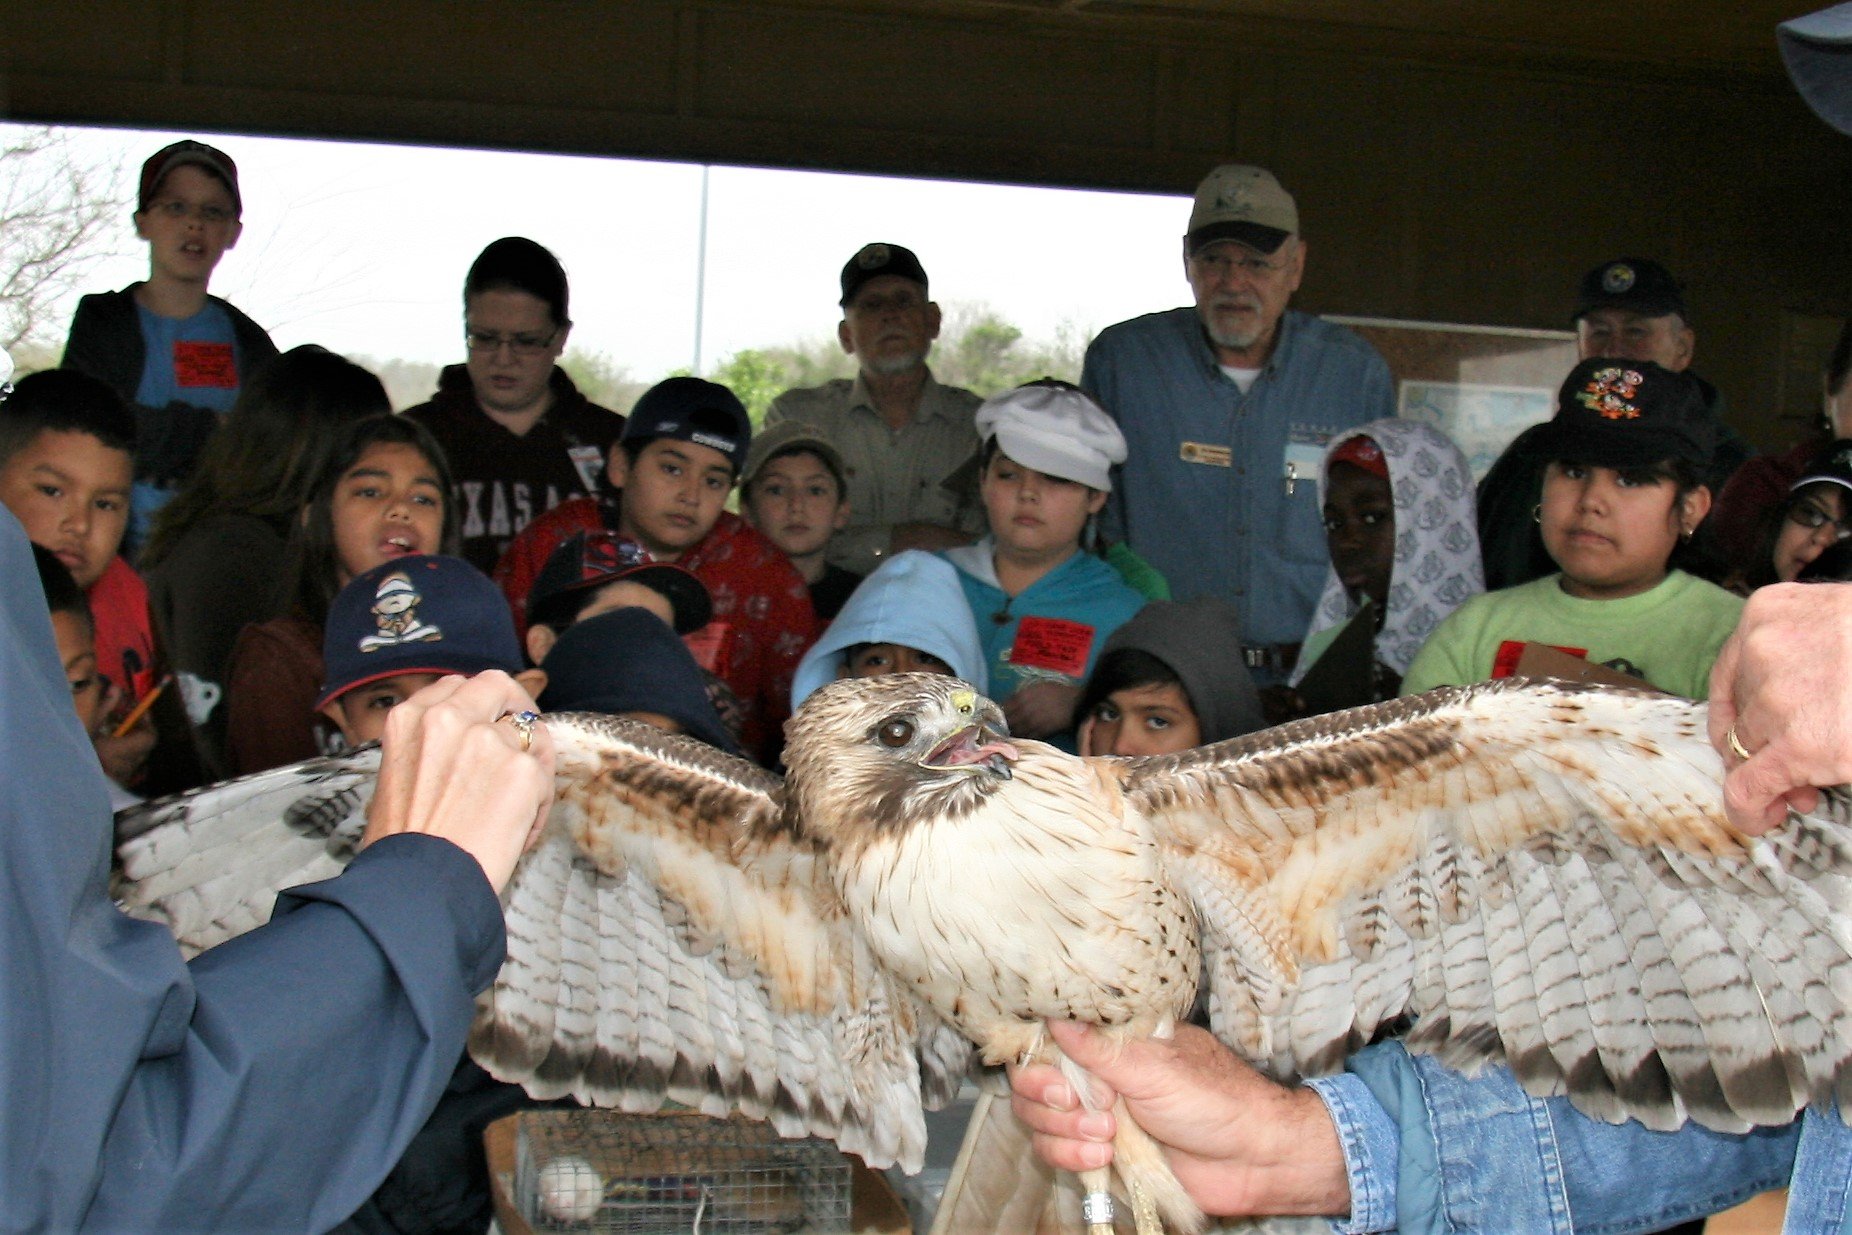 Banding a red-tailed hawk gets the attention of all | Marty Cornell